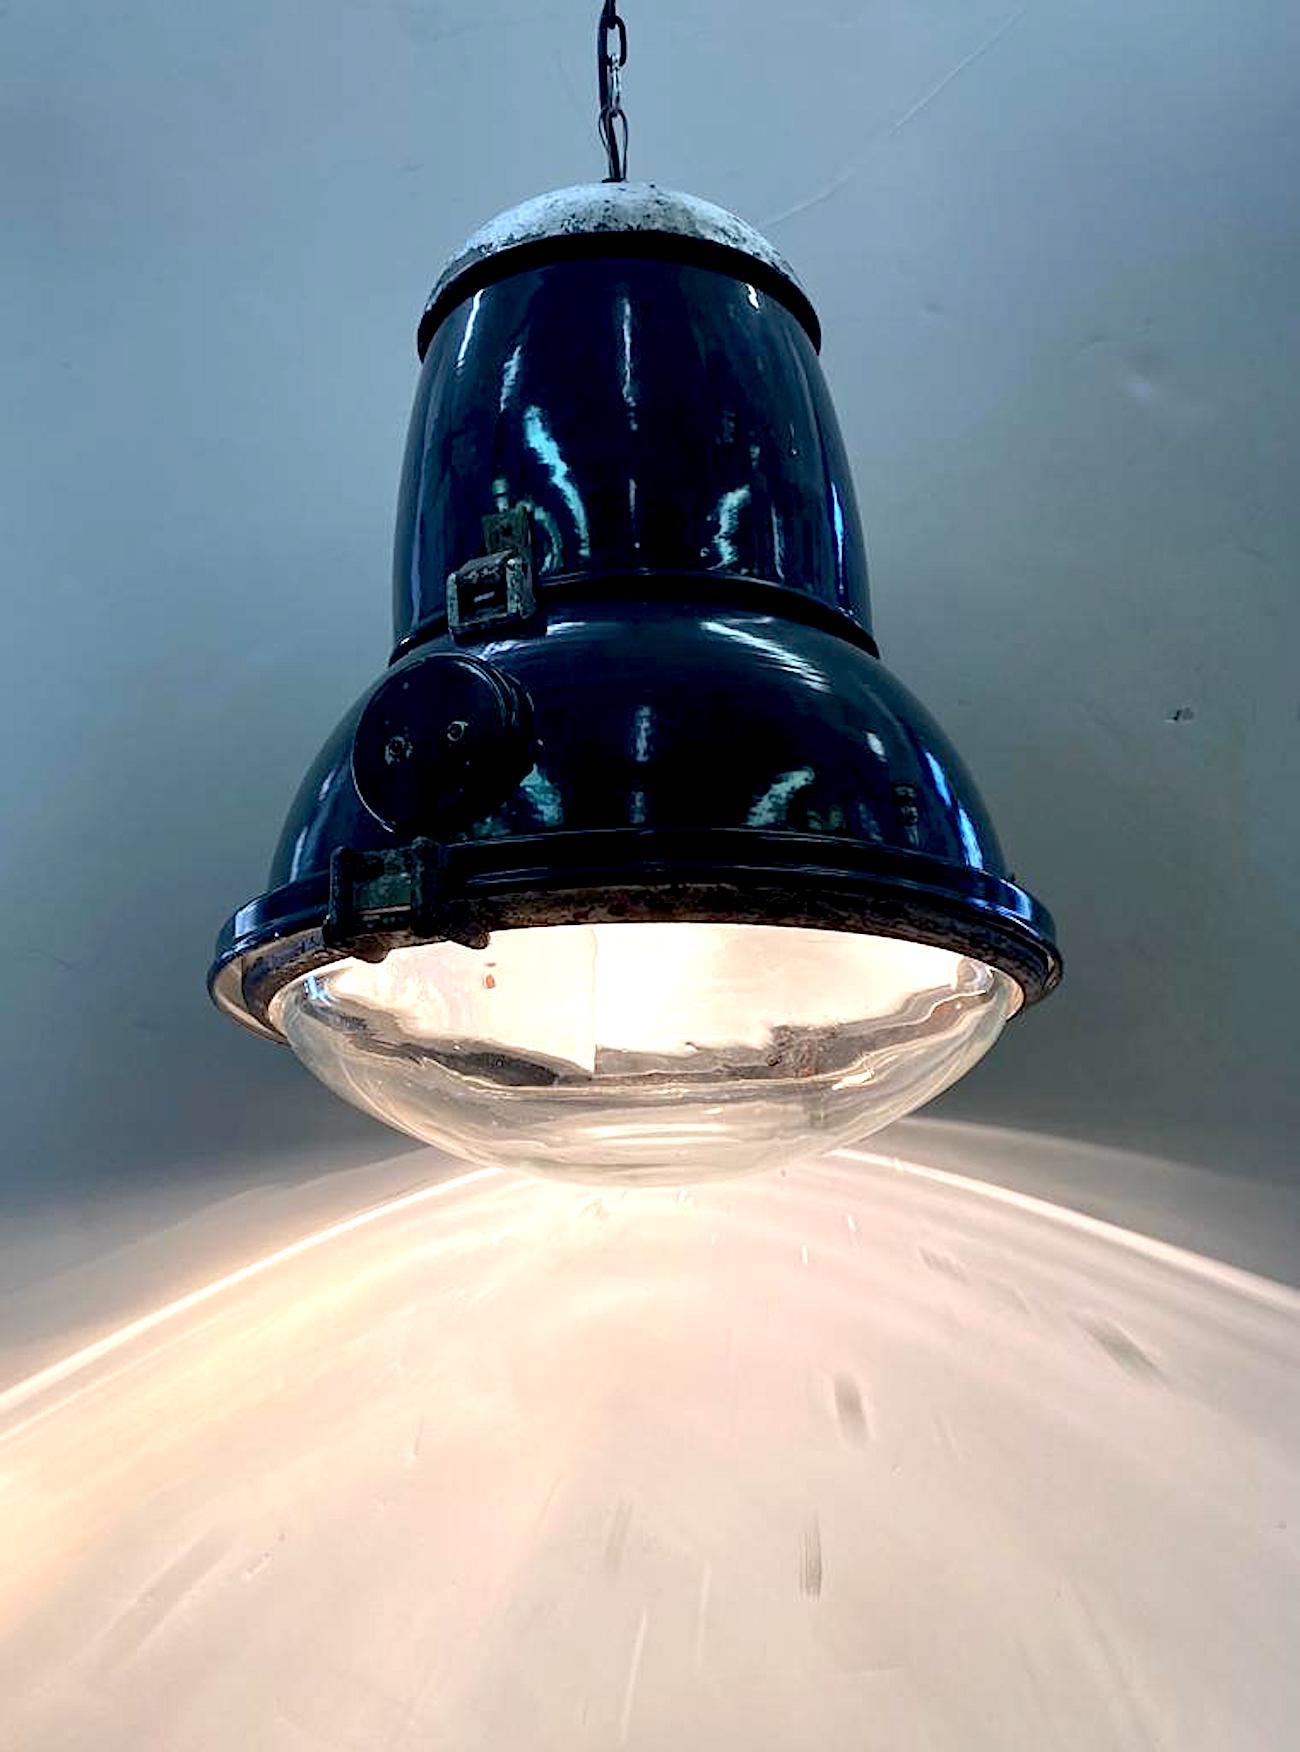 A very large Italian industrial lantern from a warehouse or factory from the 1940s-1950s. It is in a rare heavy blue enamel color on iron. The top piece is painted a silver color paint on iron. The lantern is comprised for three main pieces, a